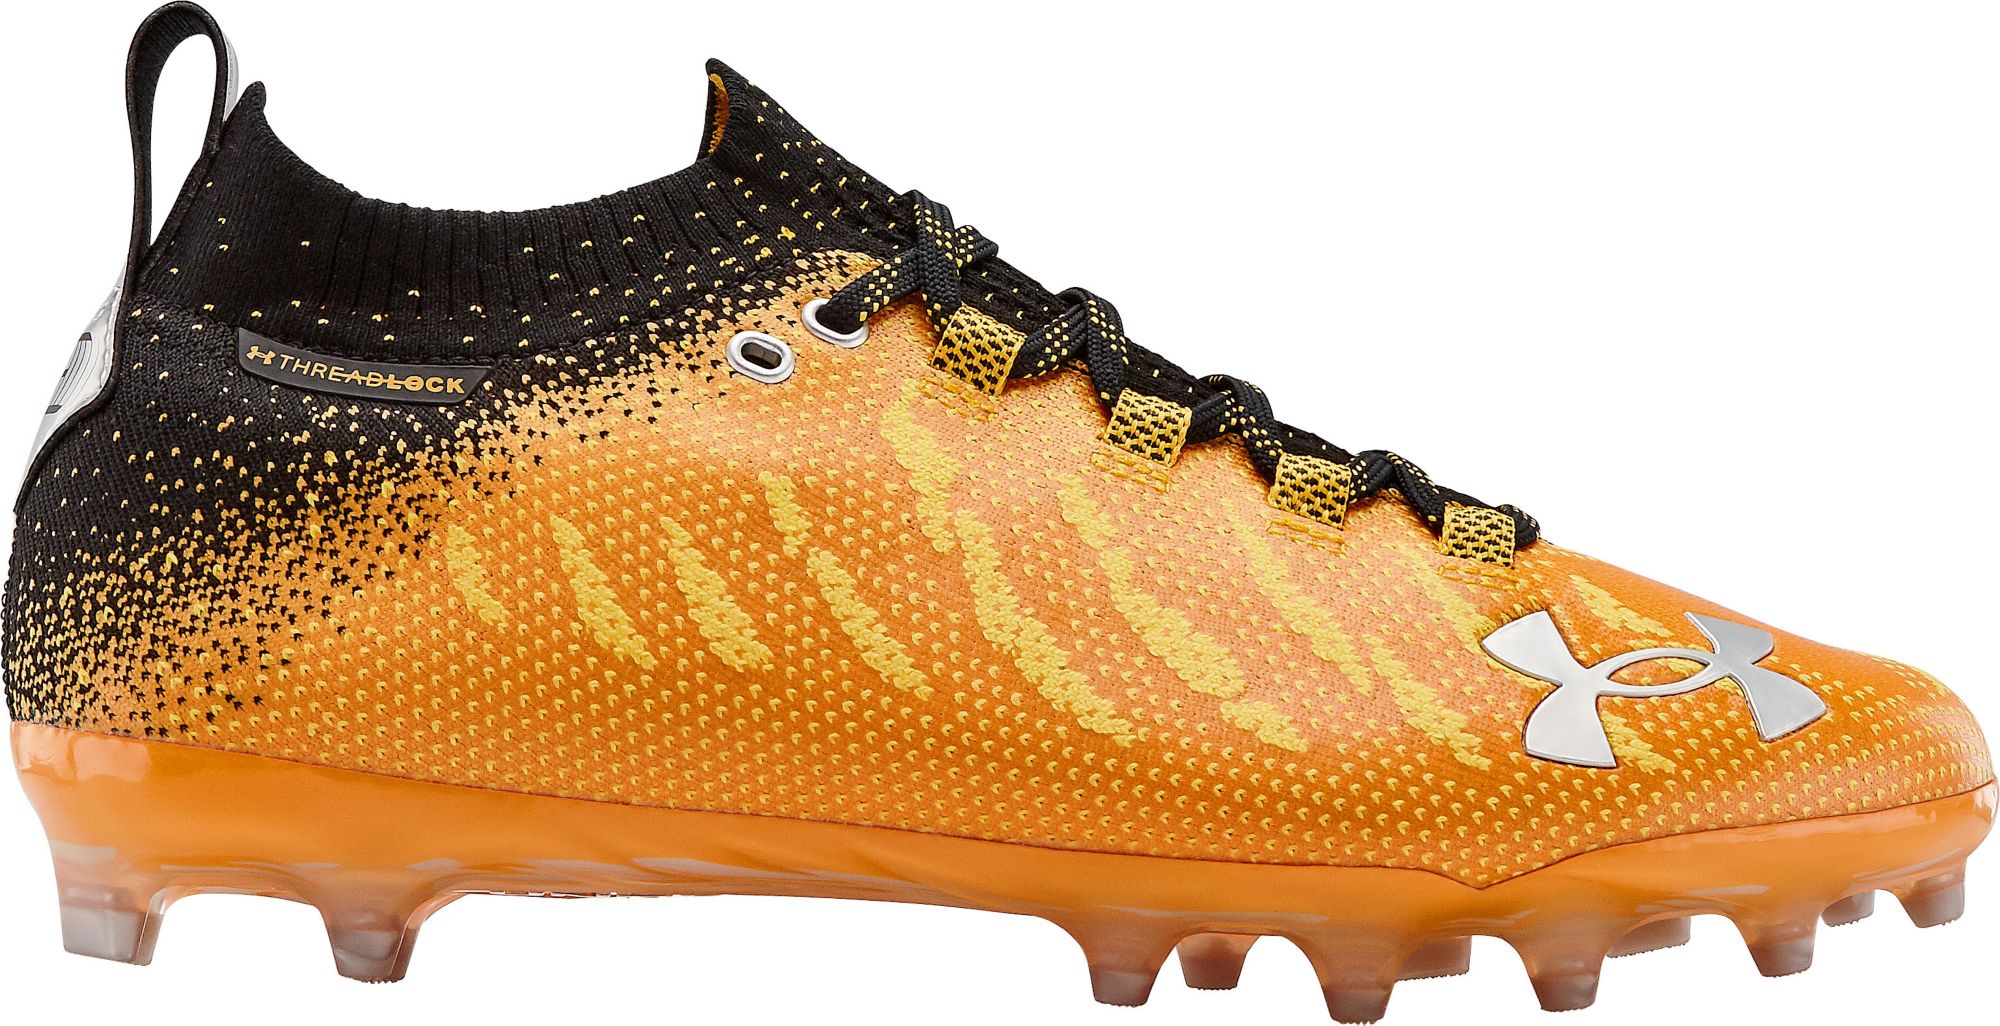 under armour football cleats yellow